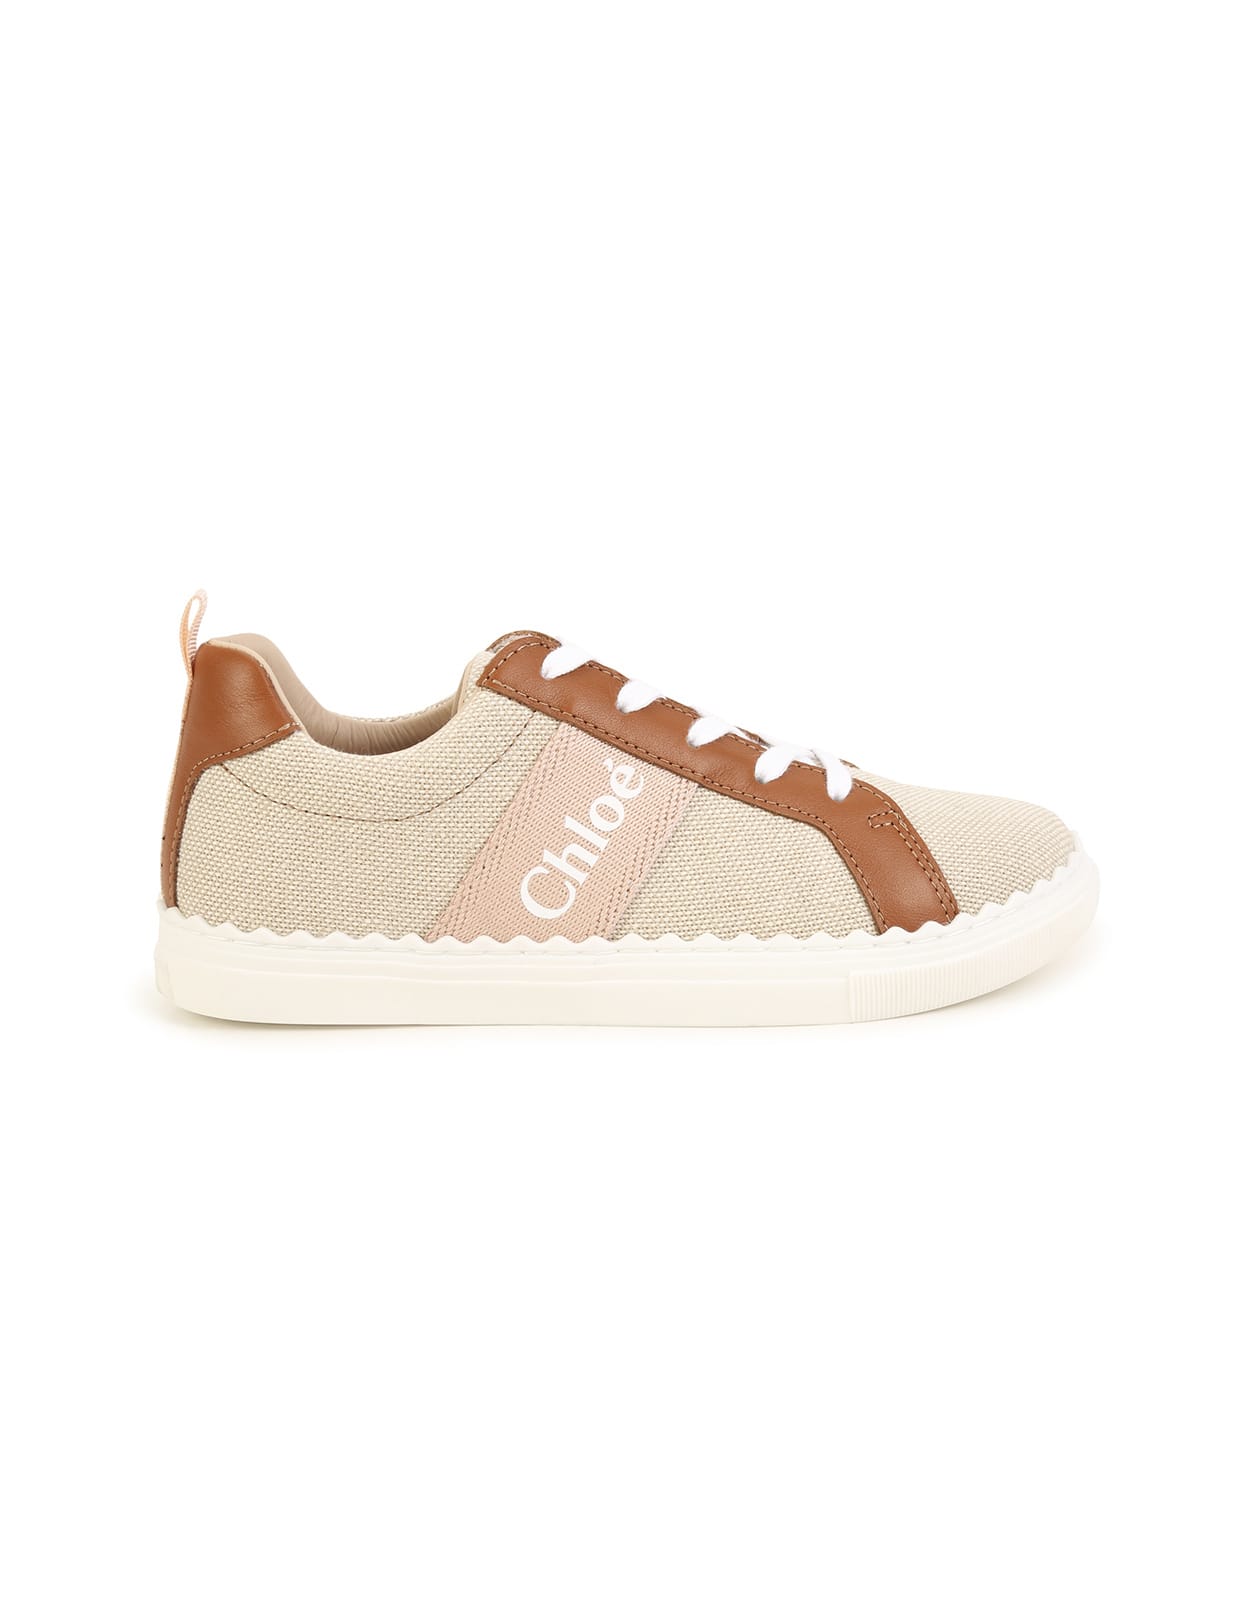 CHLOÉ LAUREN SNEAKERS IN LEATHER AND CANVAS